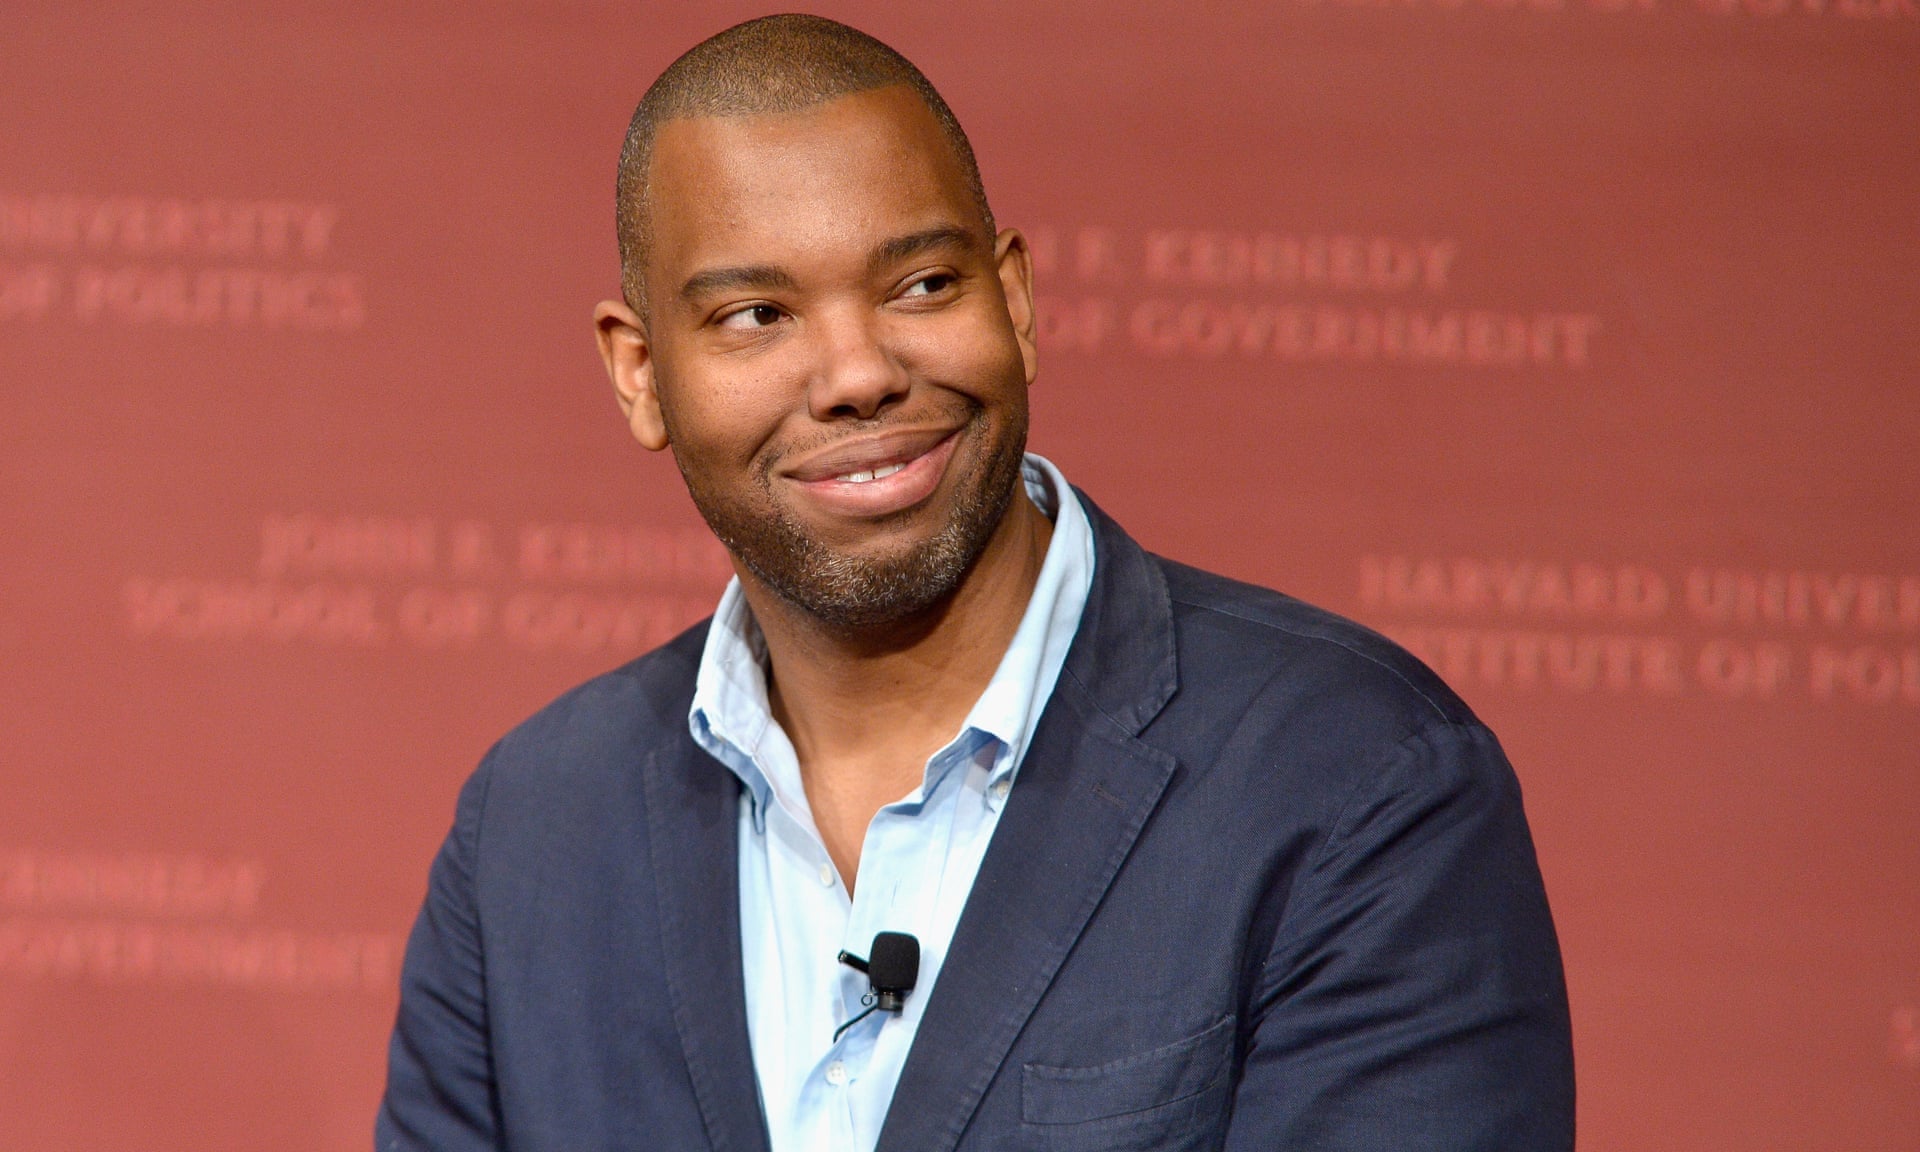 Ta Nehisi Coates, African American Writer, Black Writer, African American Author, Black Author African American Literature, Black Literature, We Were Eight Years in Power, Between the World and Me, The Water Dancer, KOLUMN Magazine, KOLUMN, KINDR'D Magazine, Willoughby Avenue, Wriit,